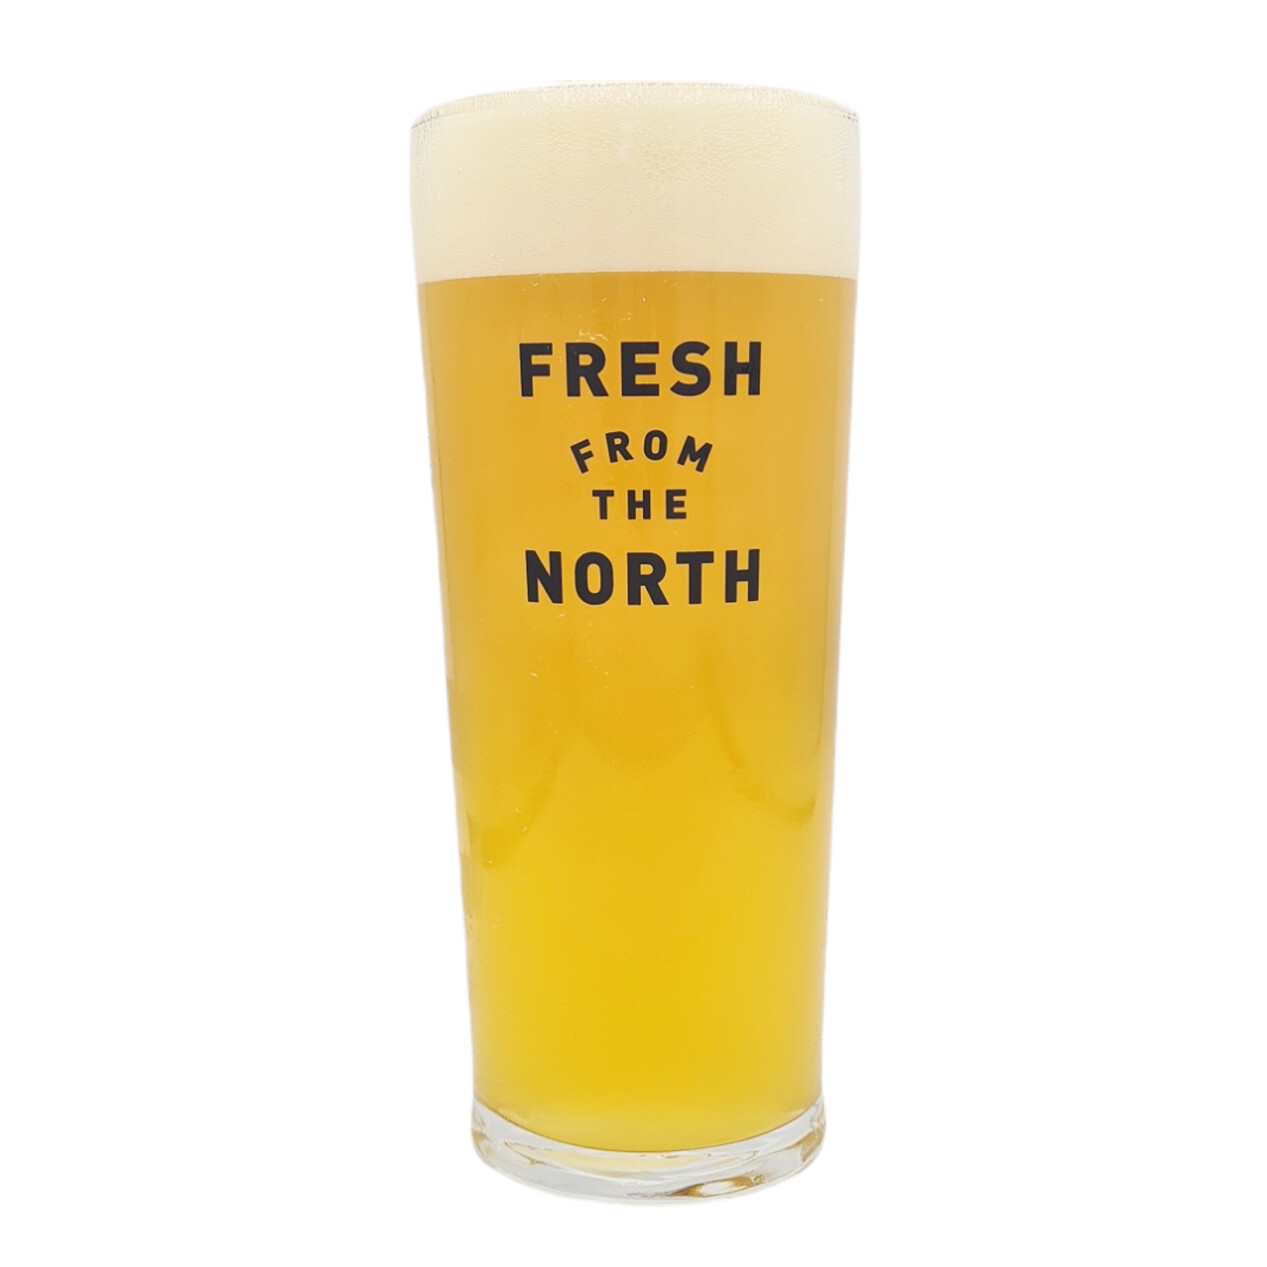 Northern Monk FRESH FROM THE NORTH Pint Glass